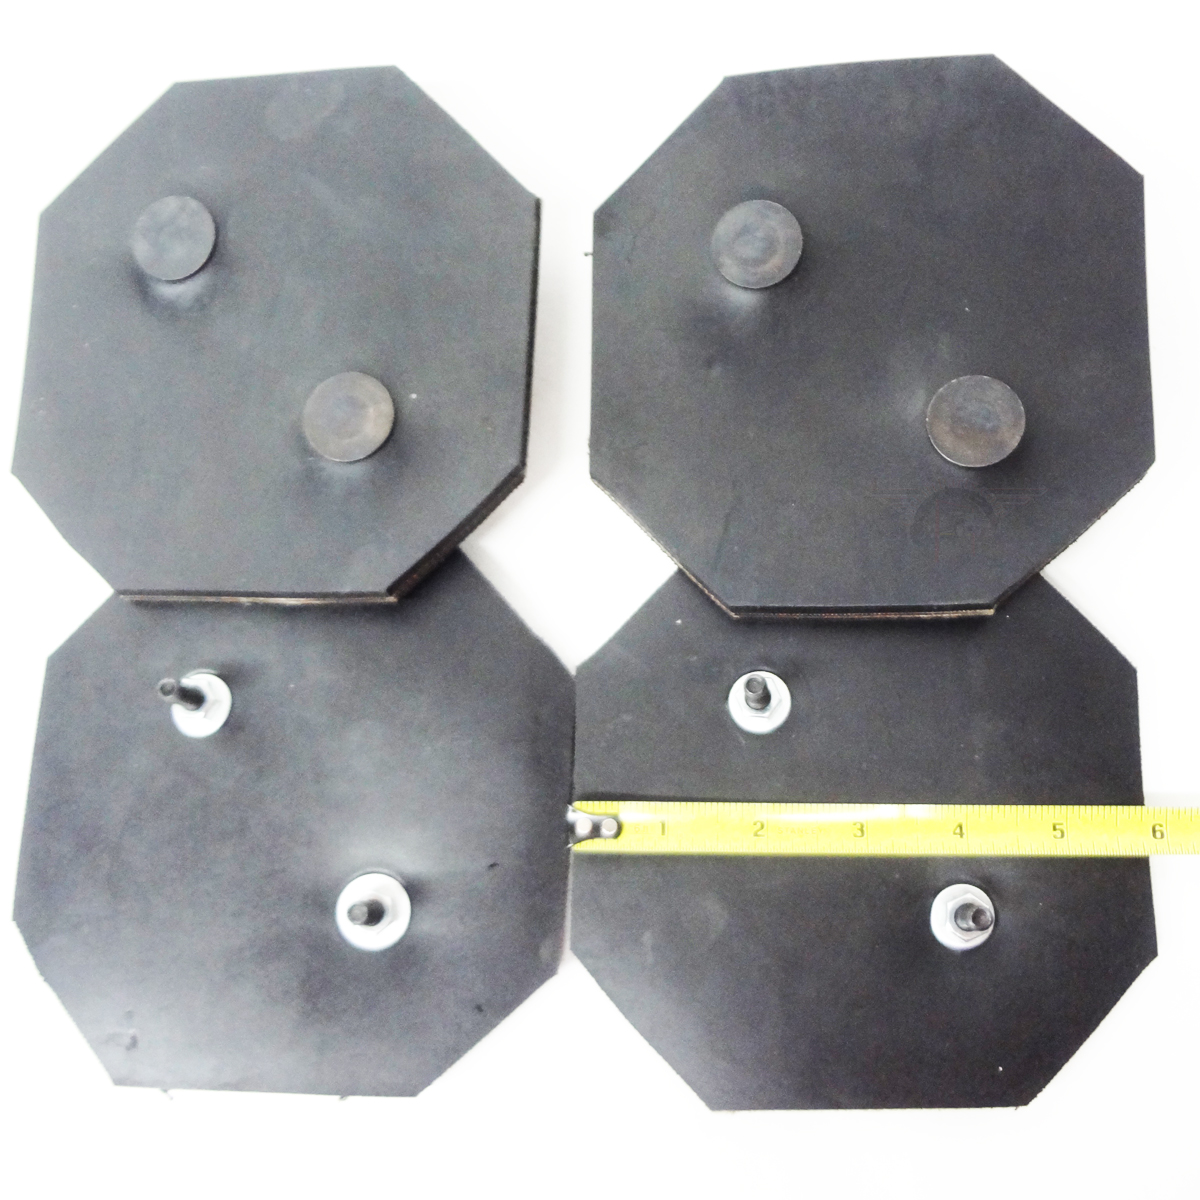 HEAVY DUTY  Rubber Arm Pad for Challenger Lift VBM Lifts Set of 4 pads Octagon 